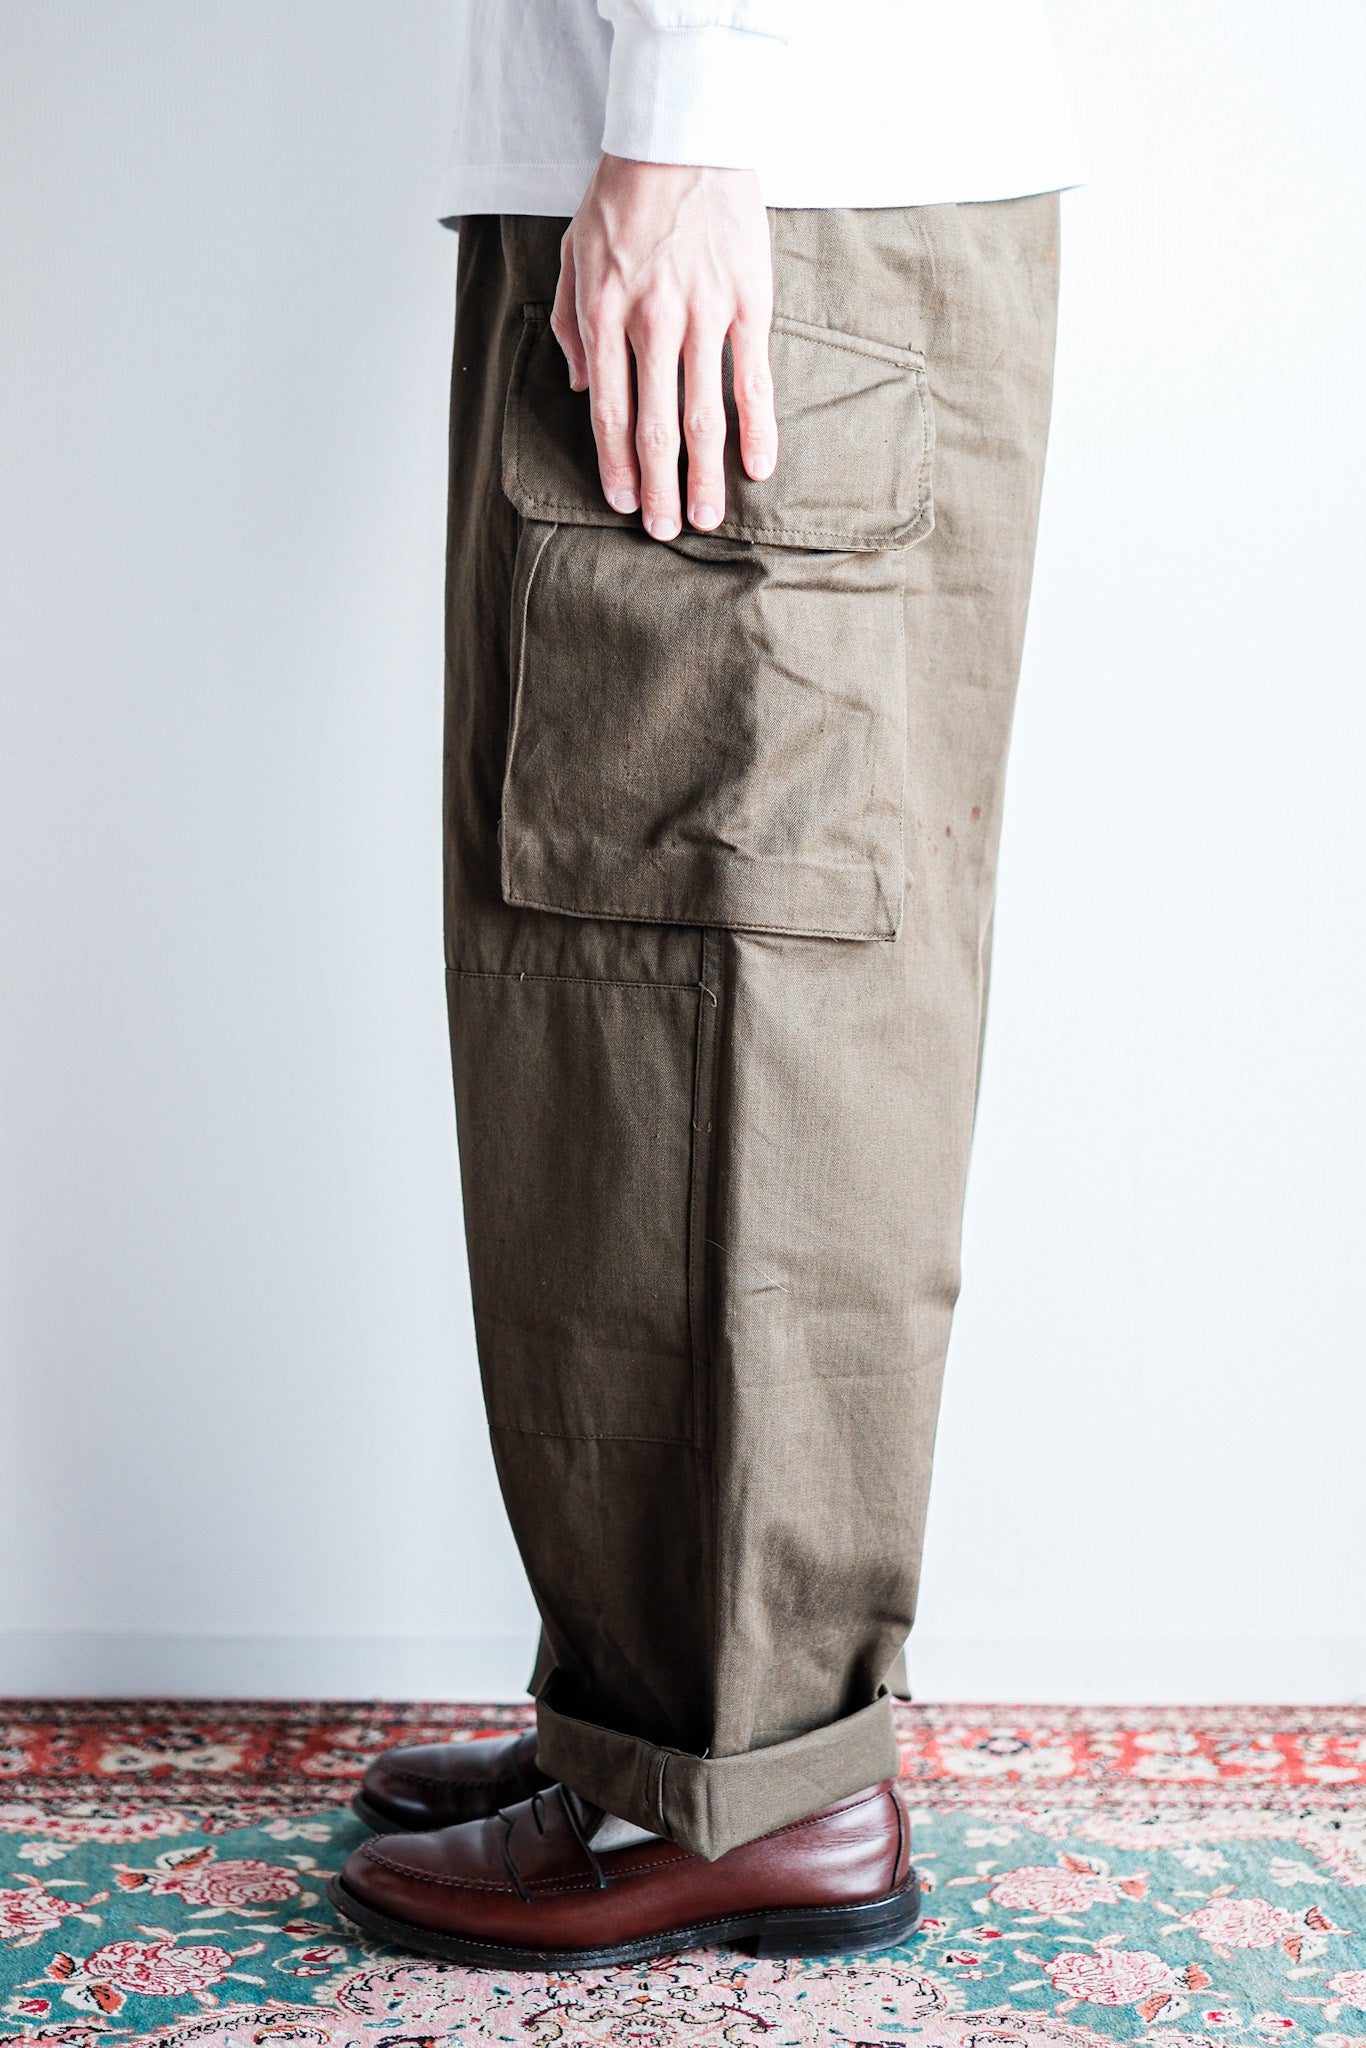 [~ 60's] French Army M47 Field Trousers Size.25 "Dead Stock"